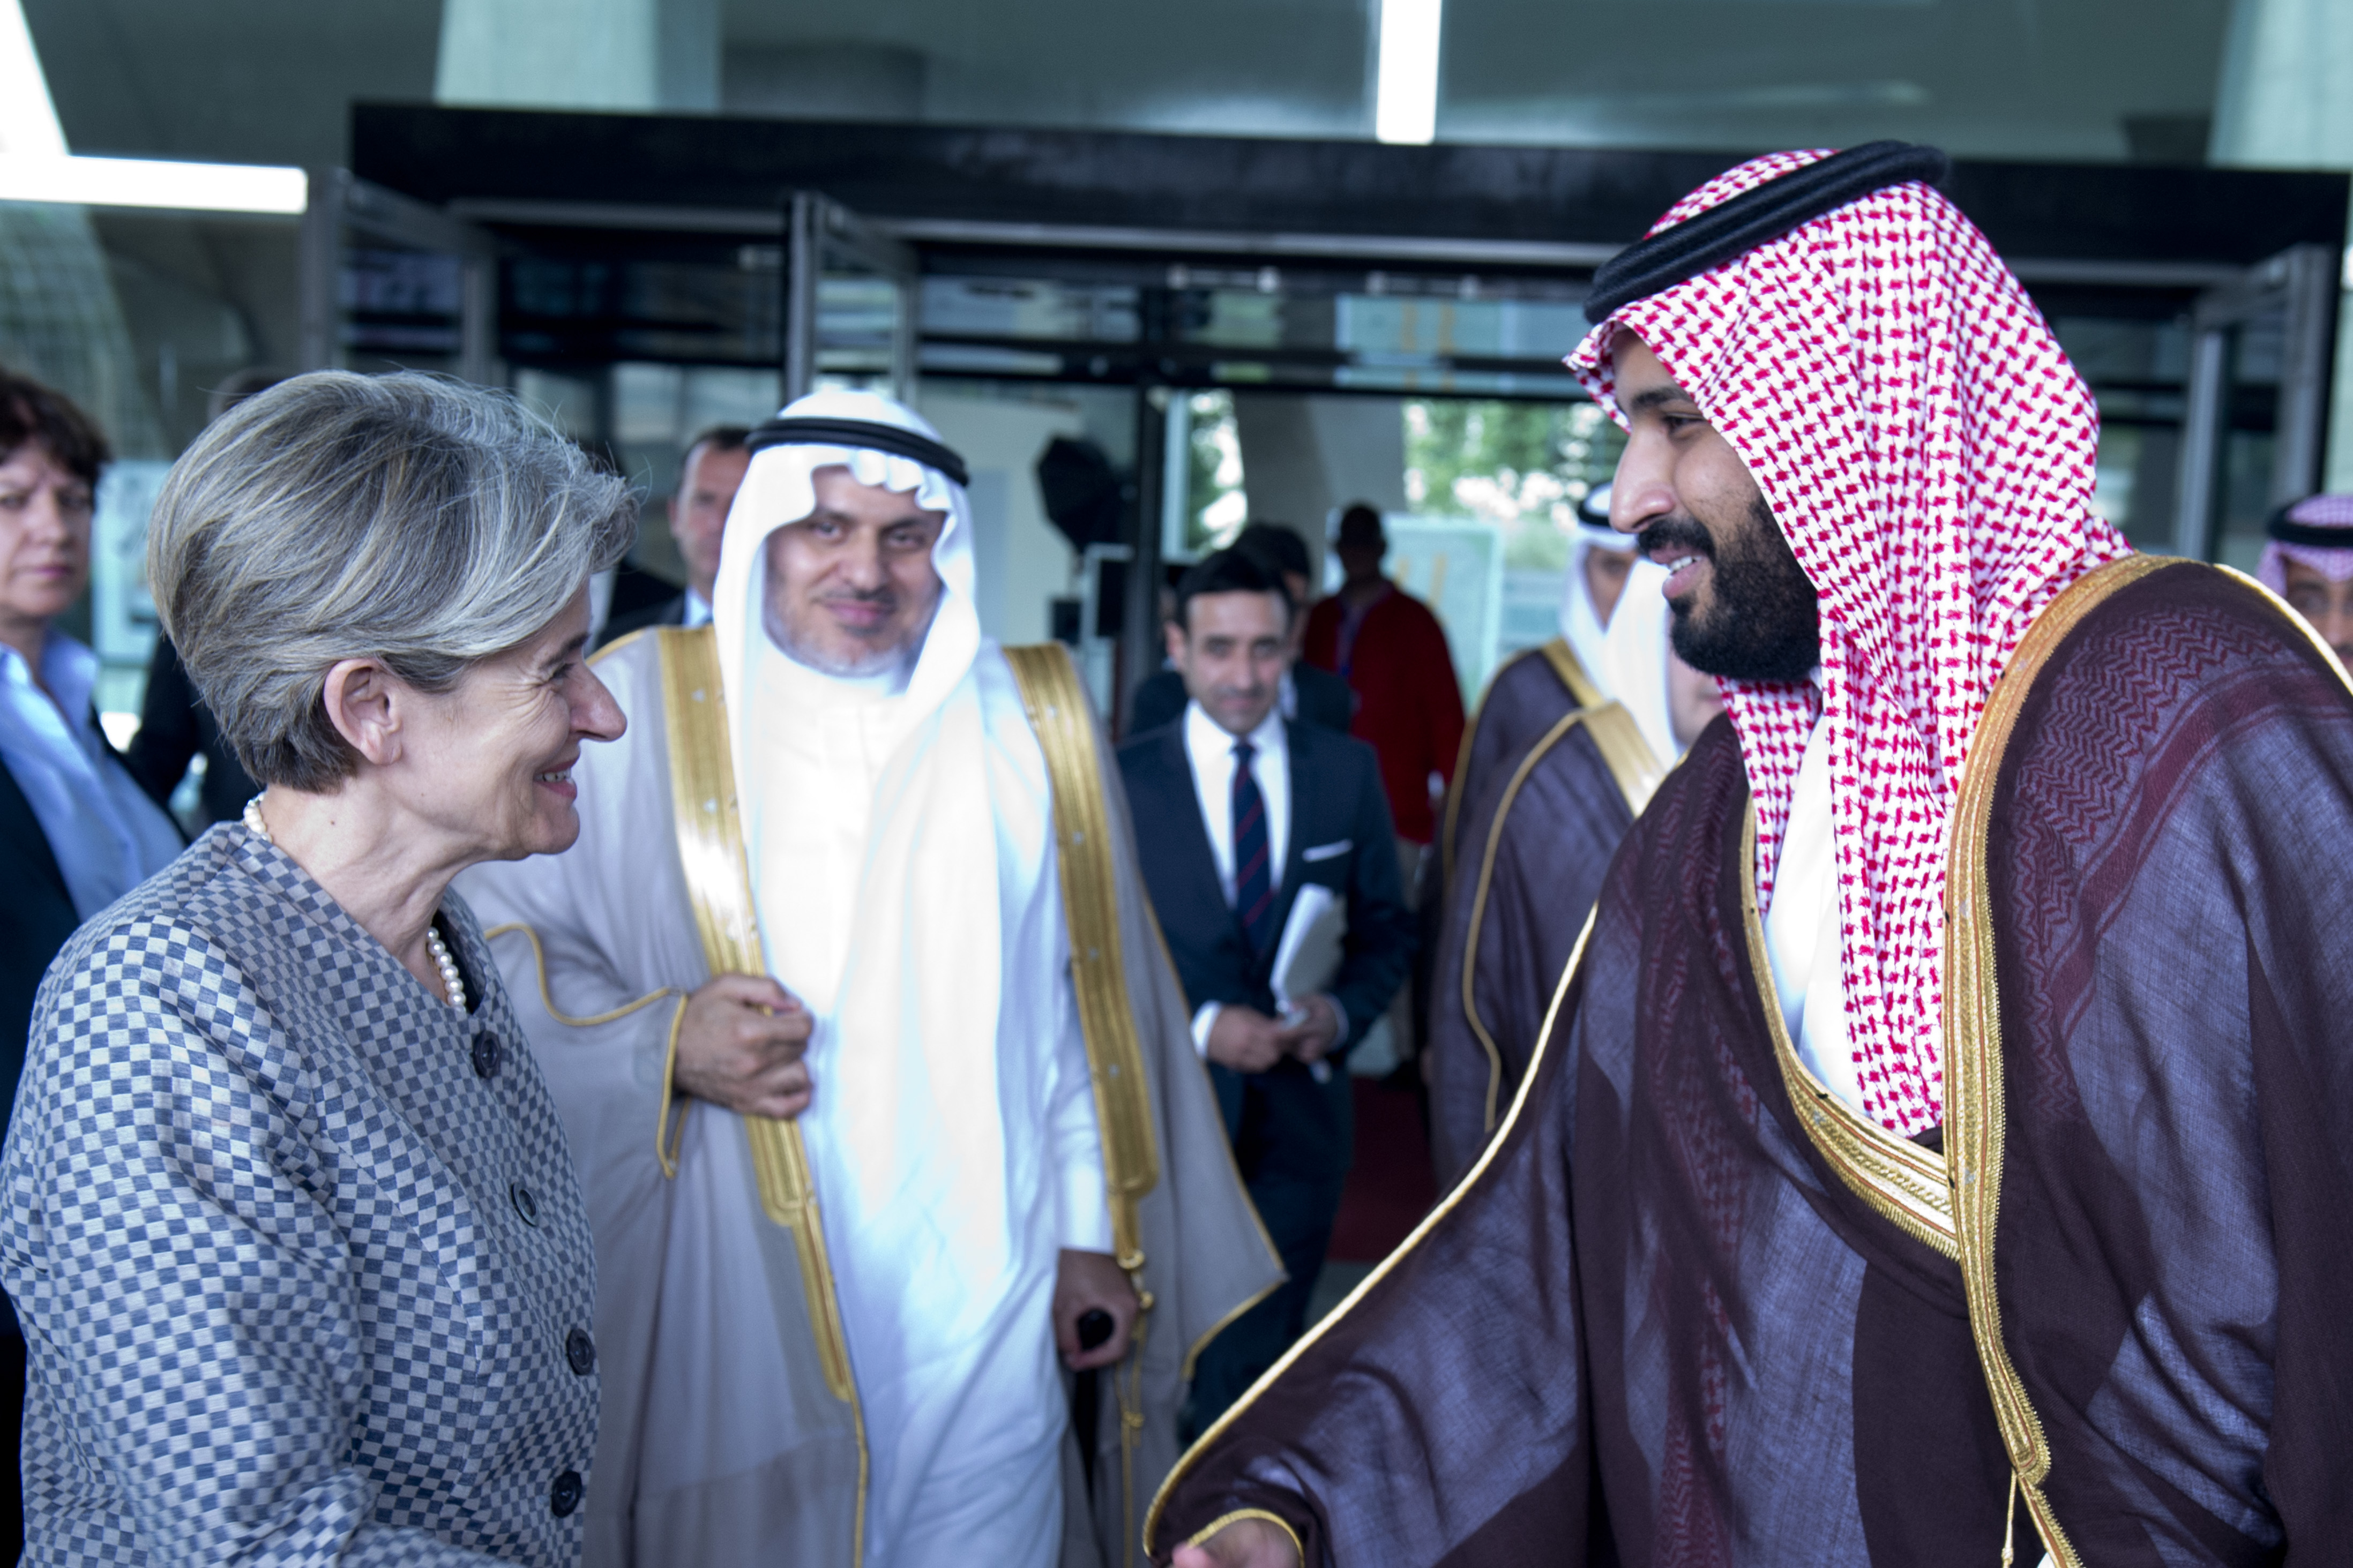 Deputy Crown Prince Mohammed bin Salman and UNESCO Director-General discuss Cultural Heritage & Education and Vision 2030